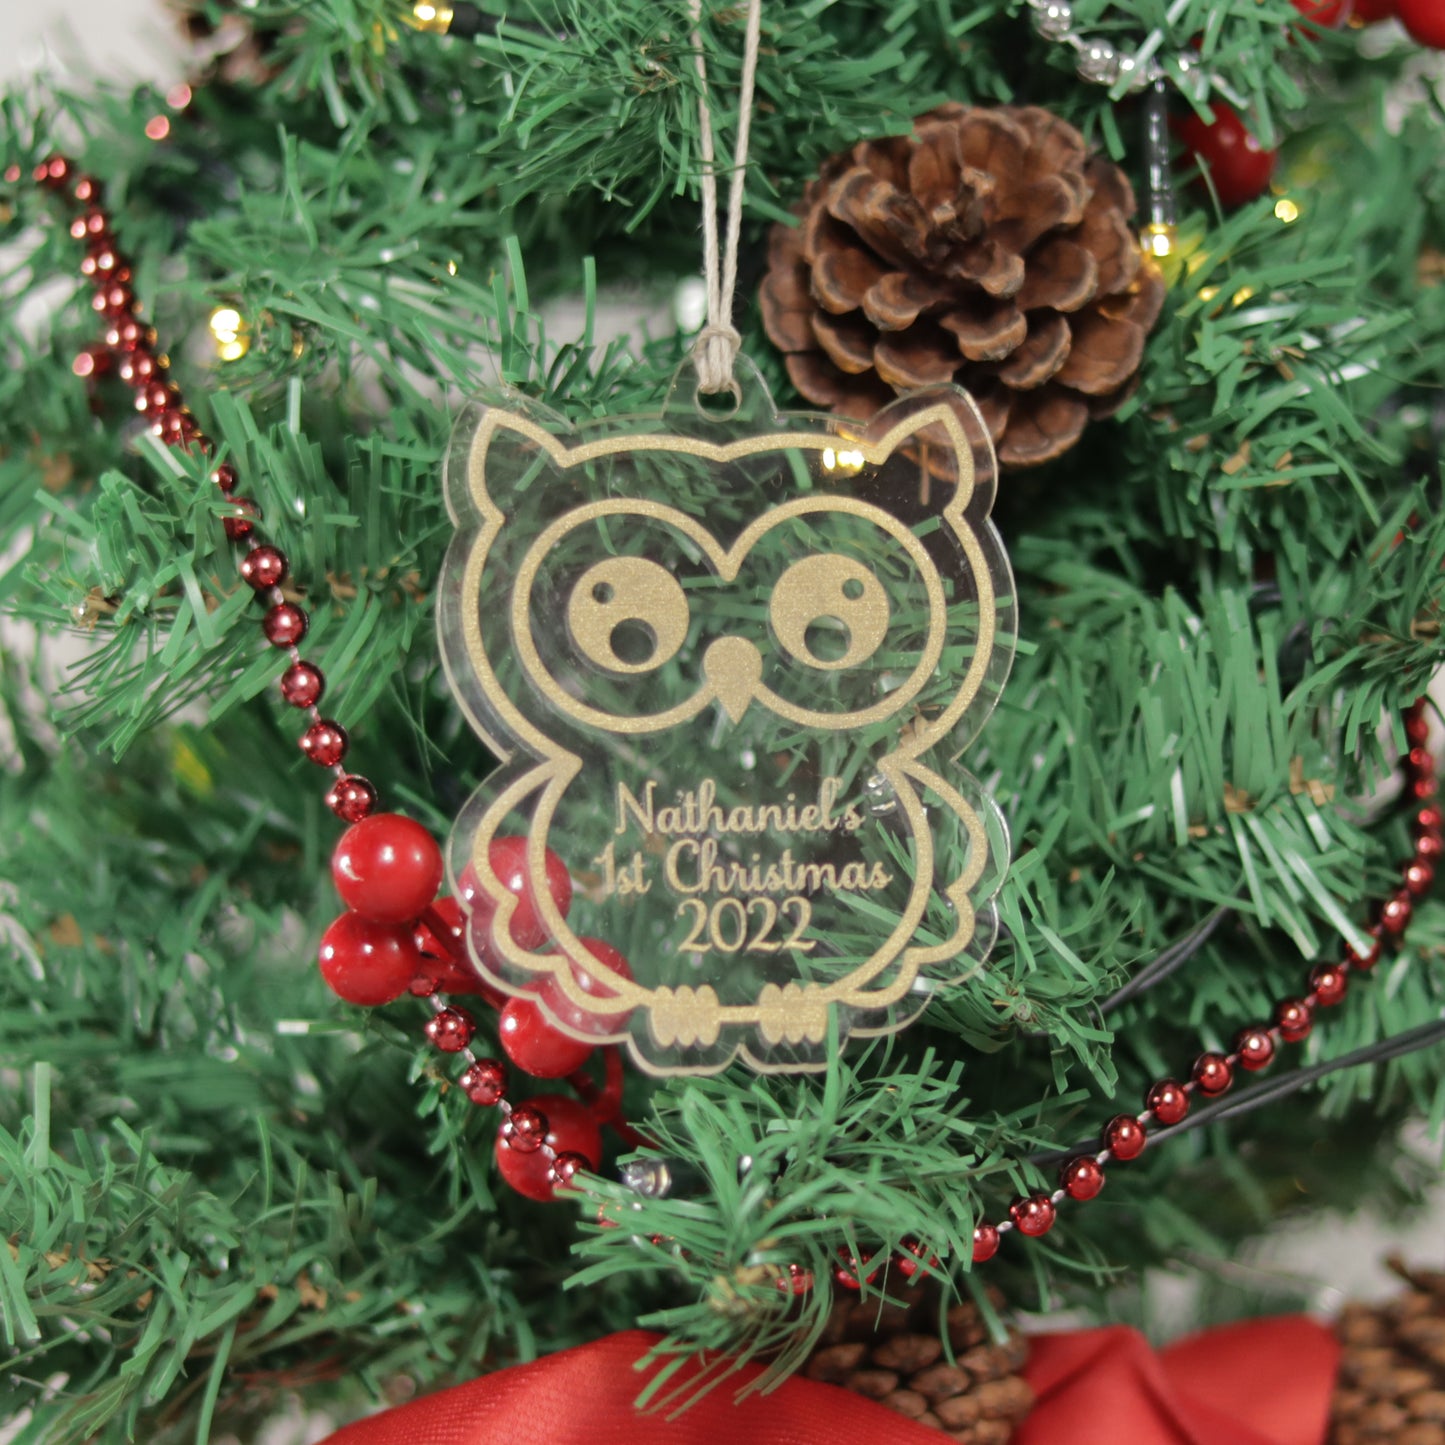 Owl shaped clear acrylic ornament hung on a mini Christmas tree. Nathaniel's 1st Christmas 2022 is etched in the ornament with gold acrylic paint filling.